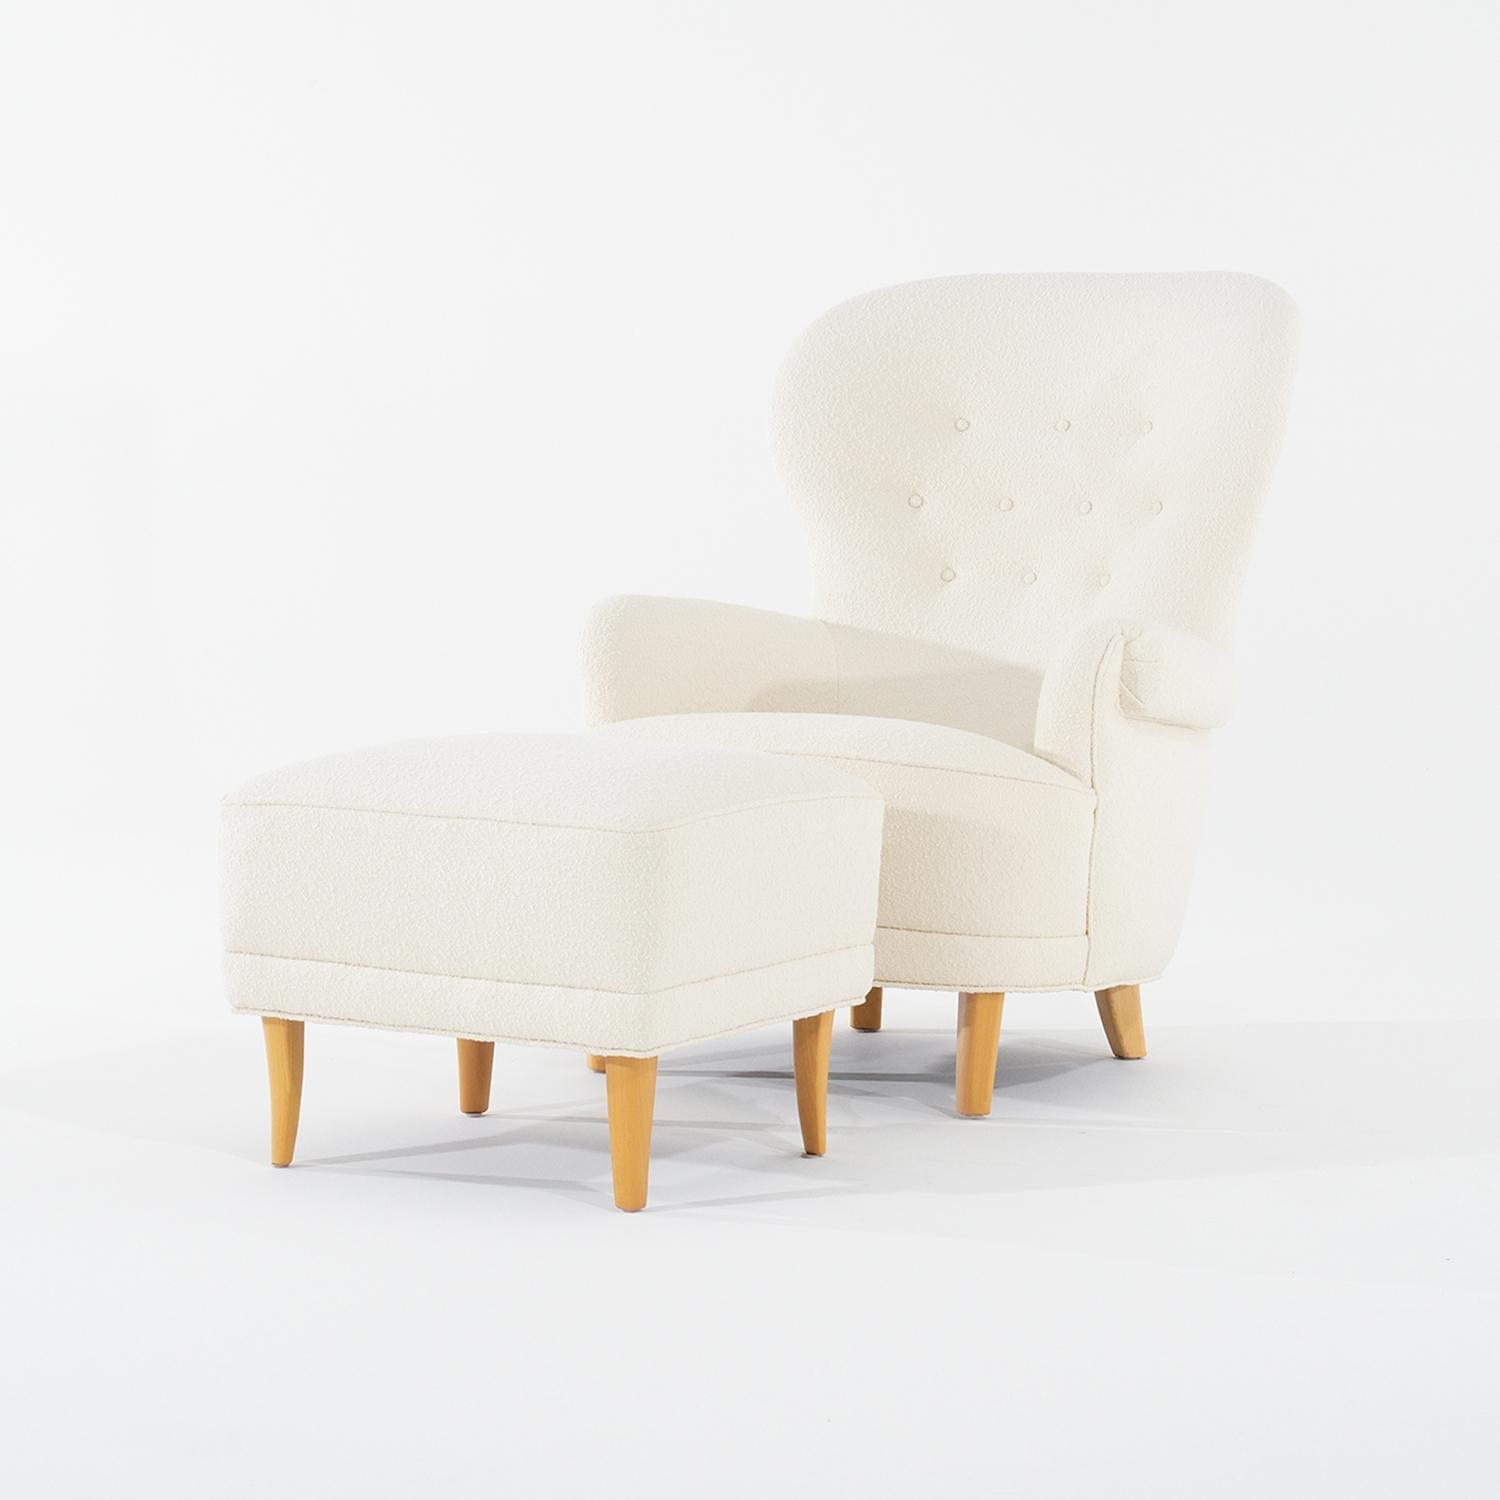 Hand-Carved 20th Century Swedish Vintage Rundrygg Lounge Chair & Footstool by Carl Malmsten For Sale